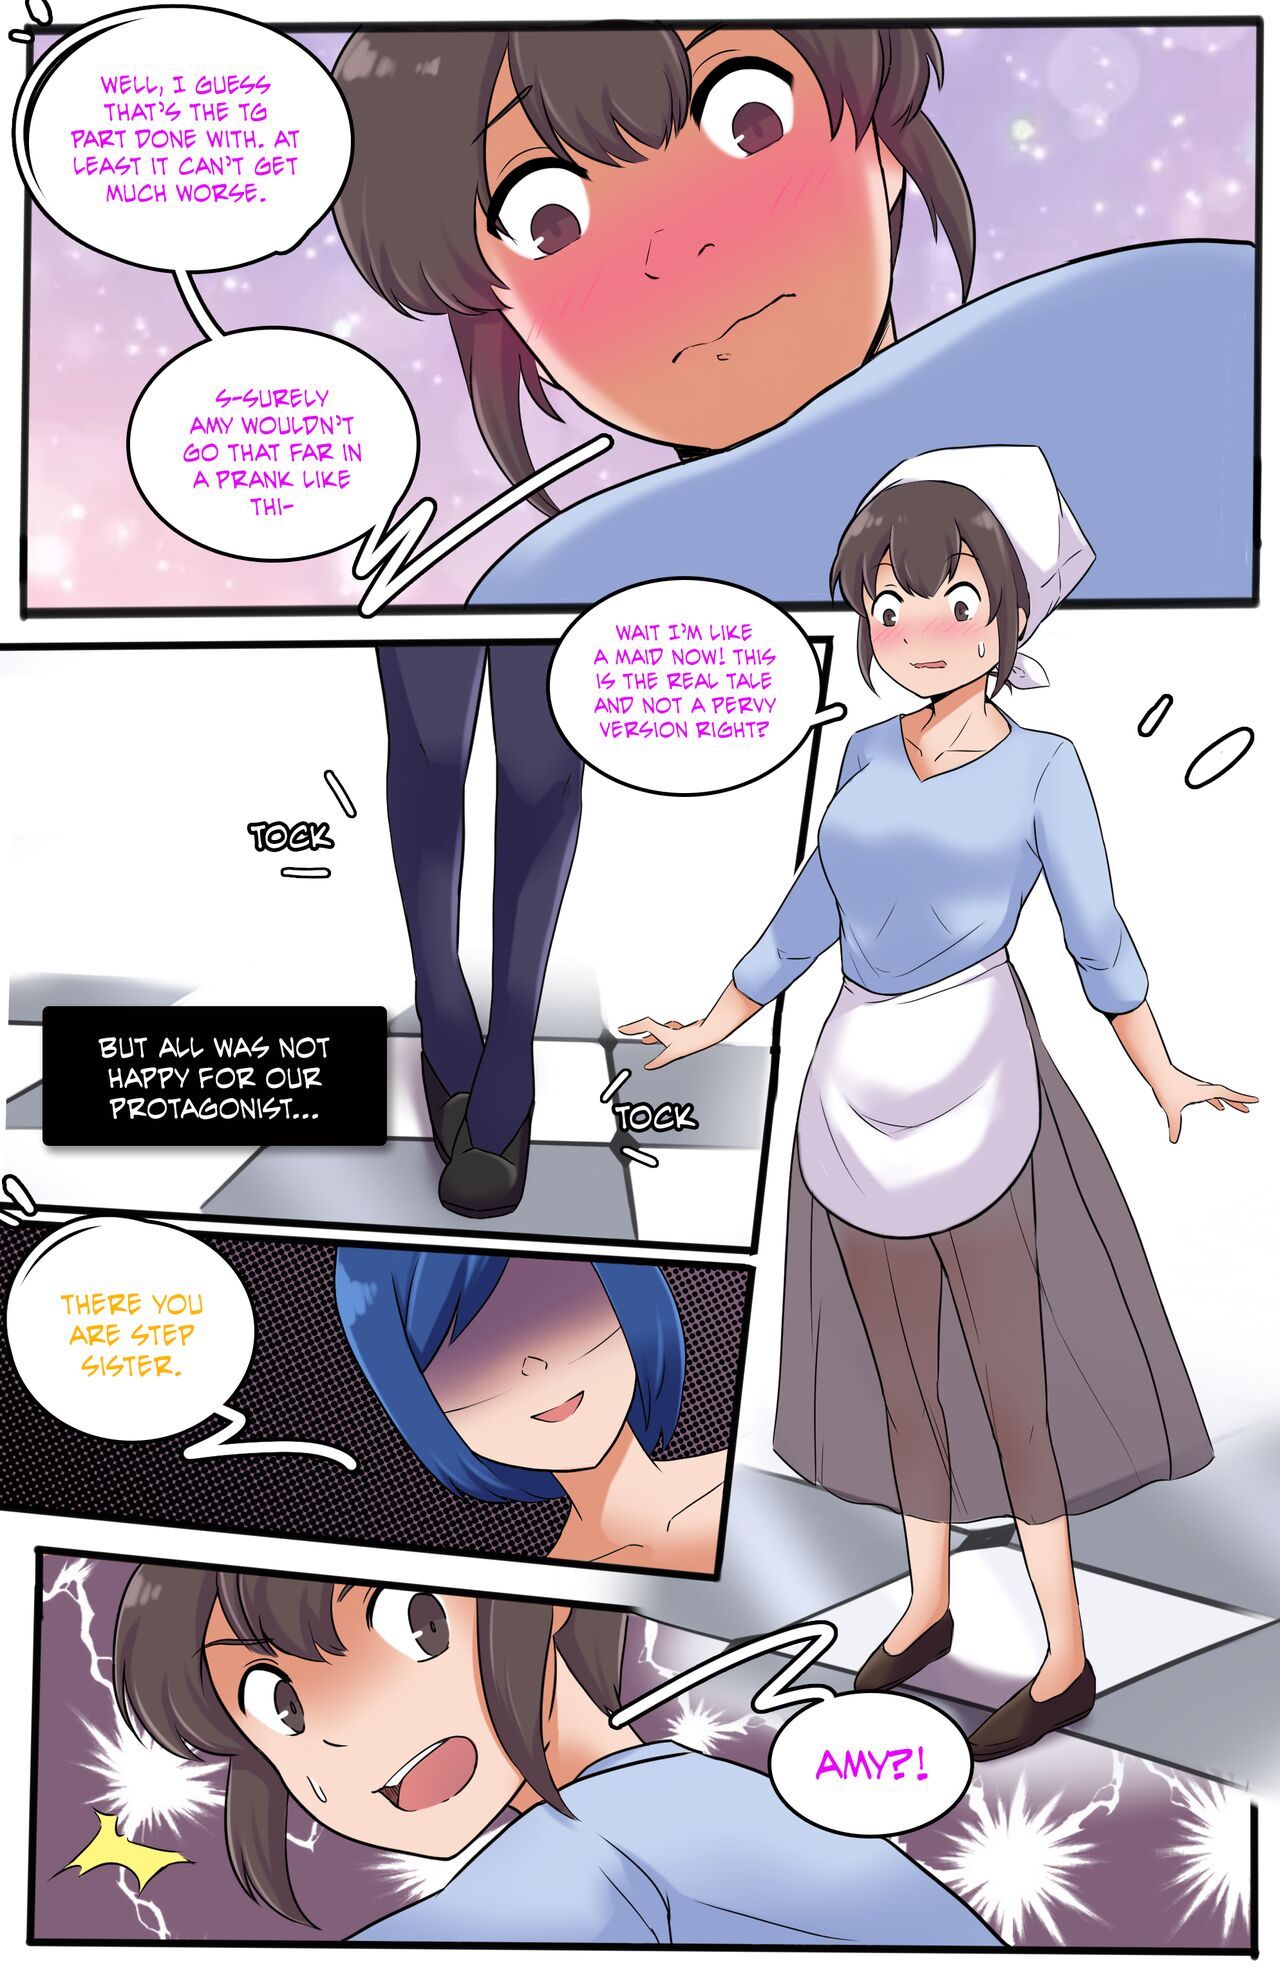 [MeowWithMe] My Little Sister, Amy Ch. 9 [Ongoing] 9